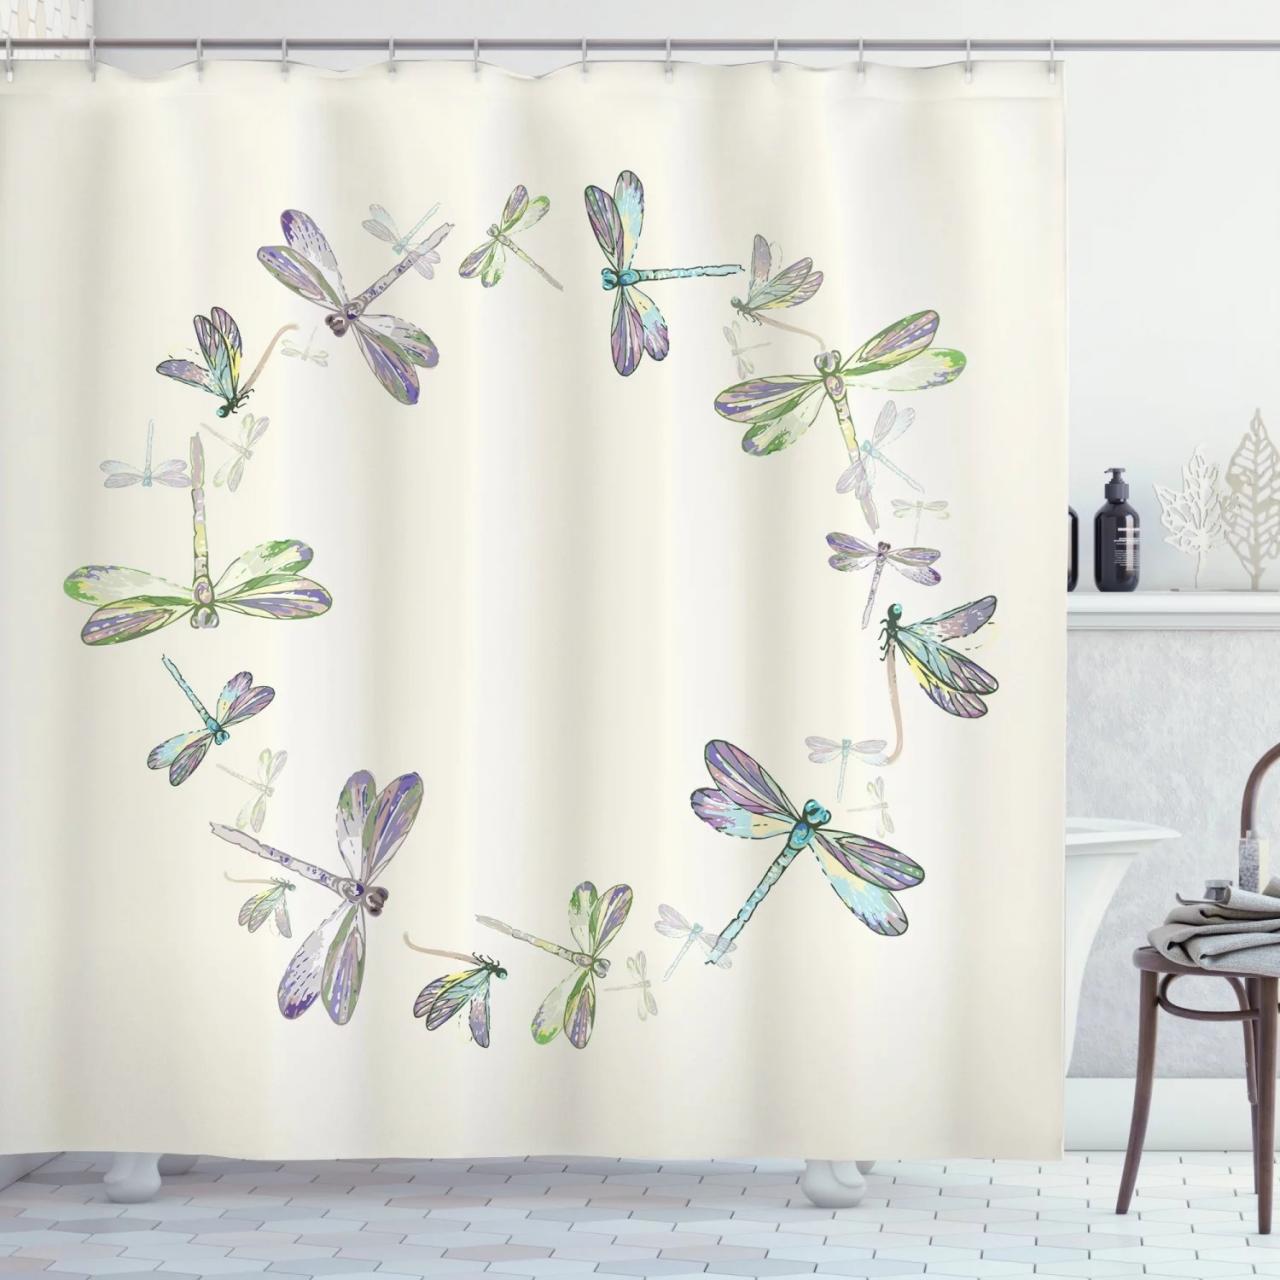 Dragonfly Shower Curtain, Dragonflies in Circular Formation Hand Drawn